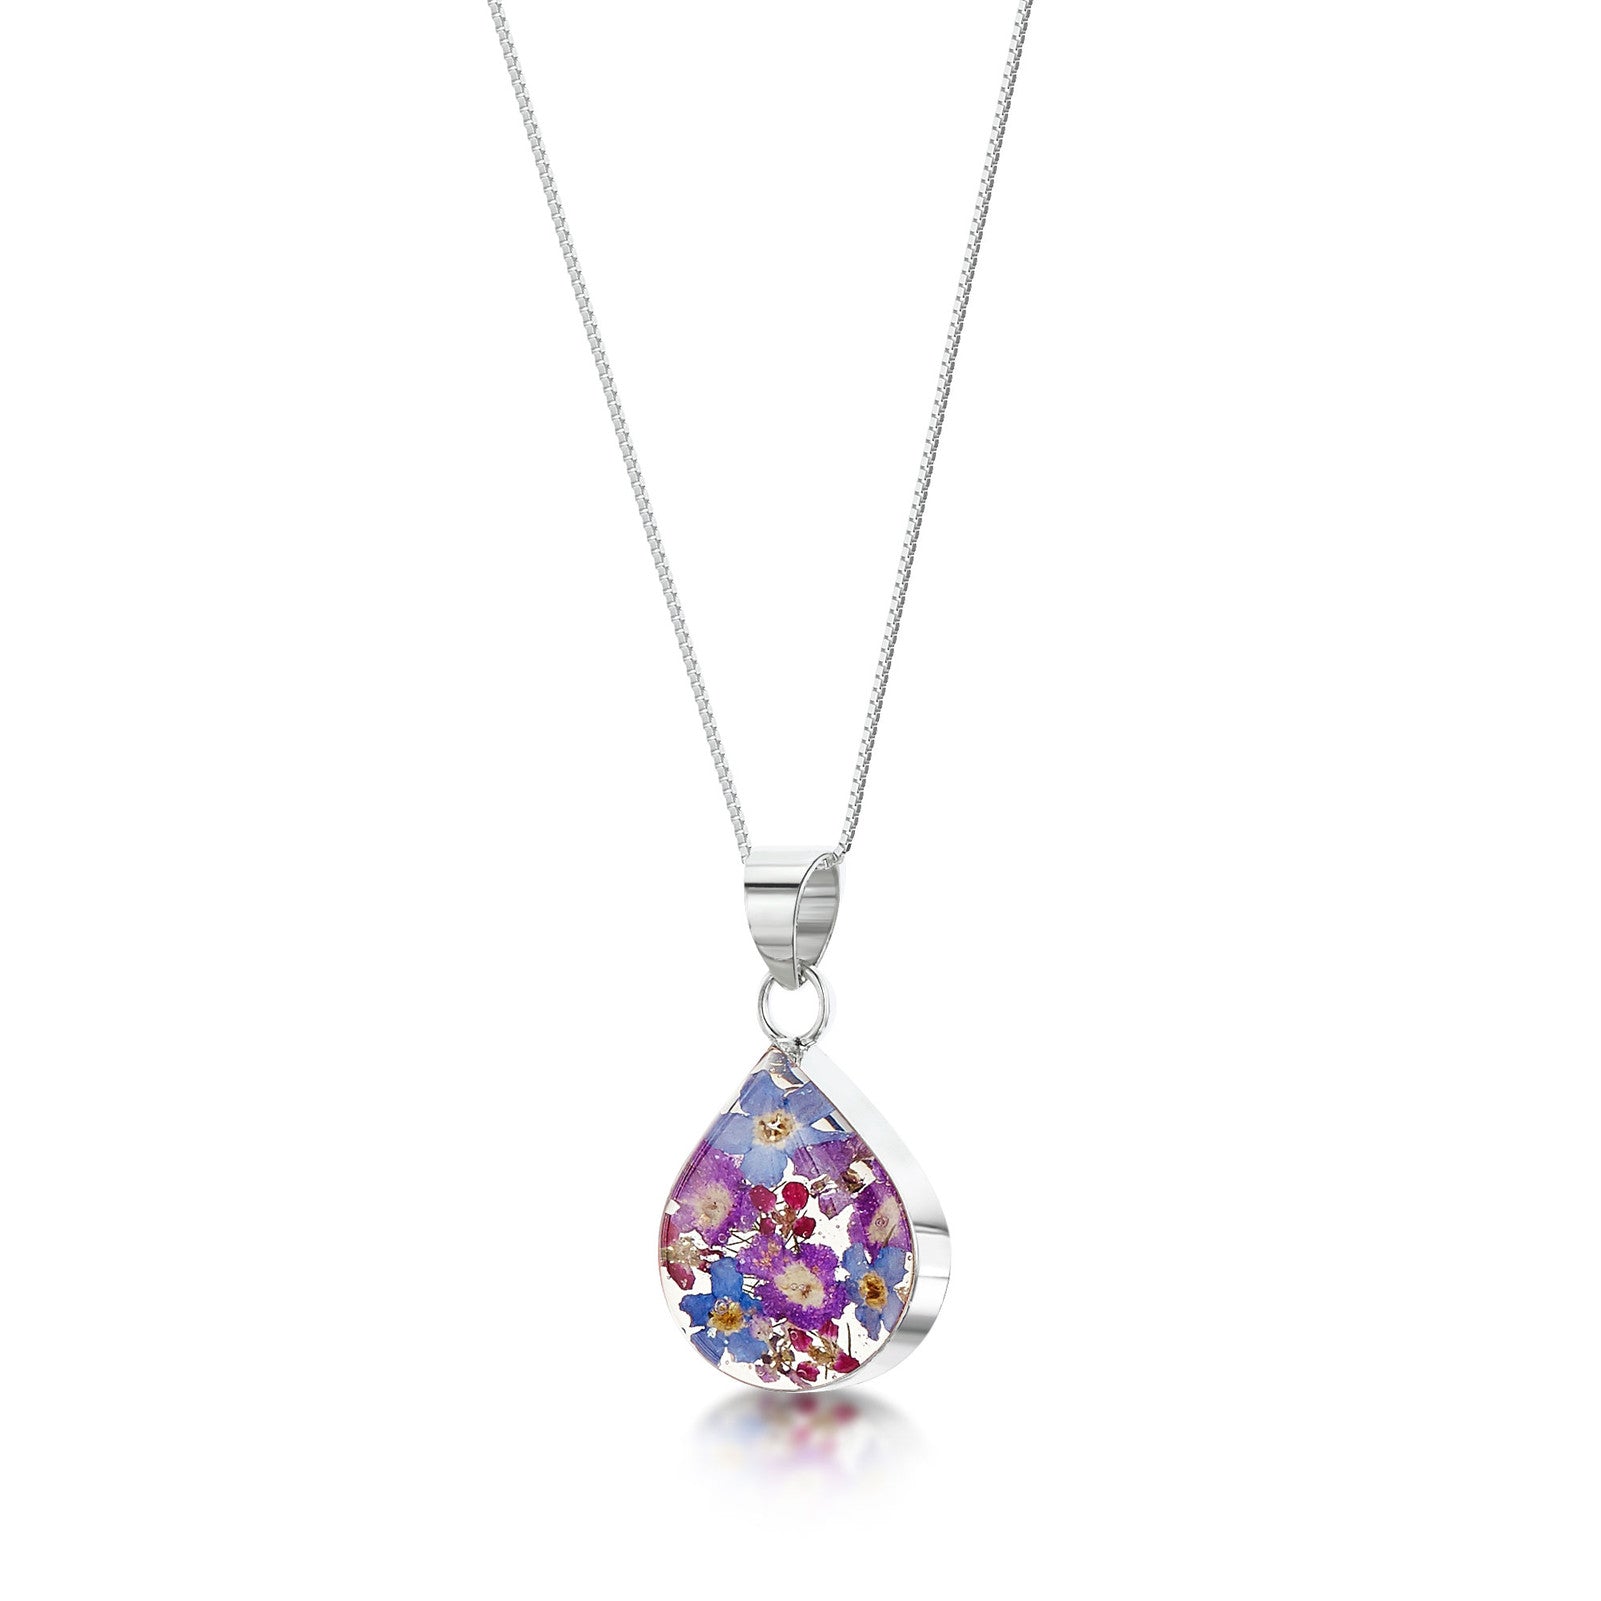 Flower Pendant - Sterling silver - BLP05 - Hallmark Jewellers Formby & The Jewellers Bench Widnes